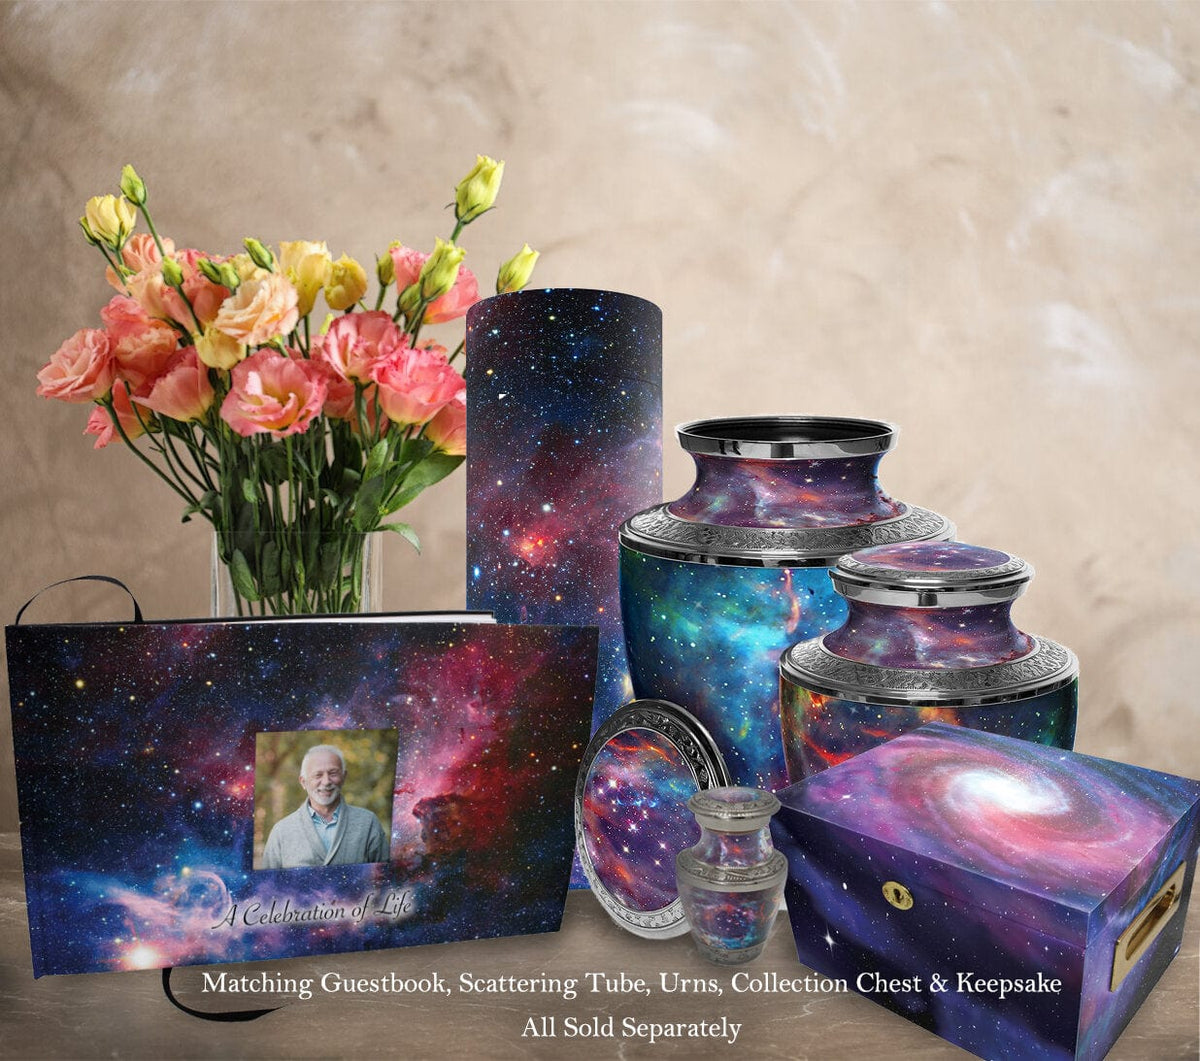 Commemorative Cremation Urns Limited Edition Crystal Galaxy with Genuine Amethyst and Quartz Memorial Collection Chest Cremation Urn